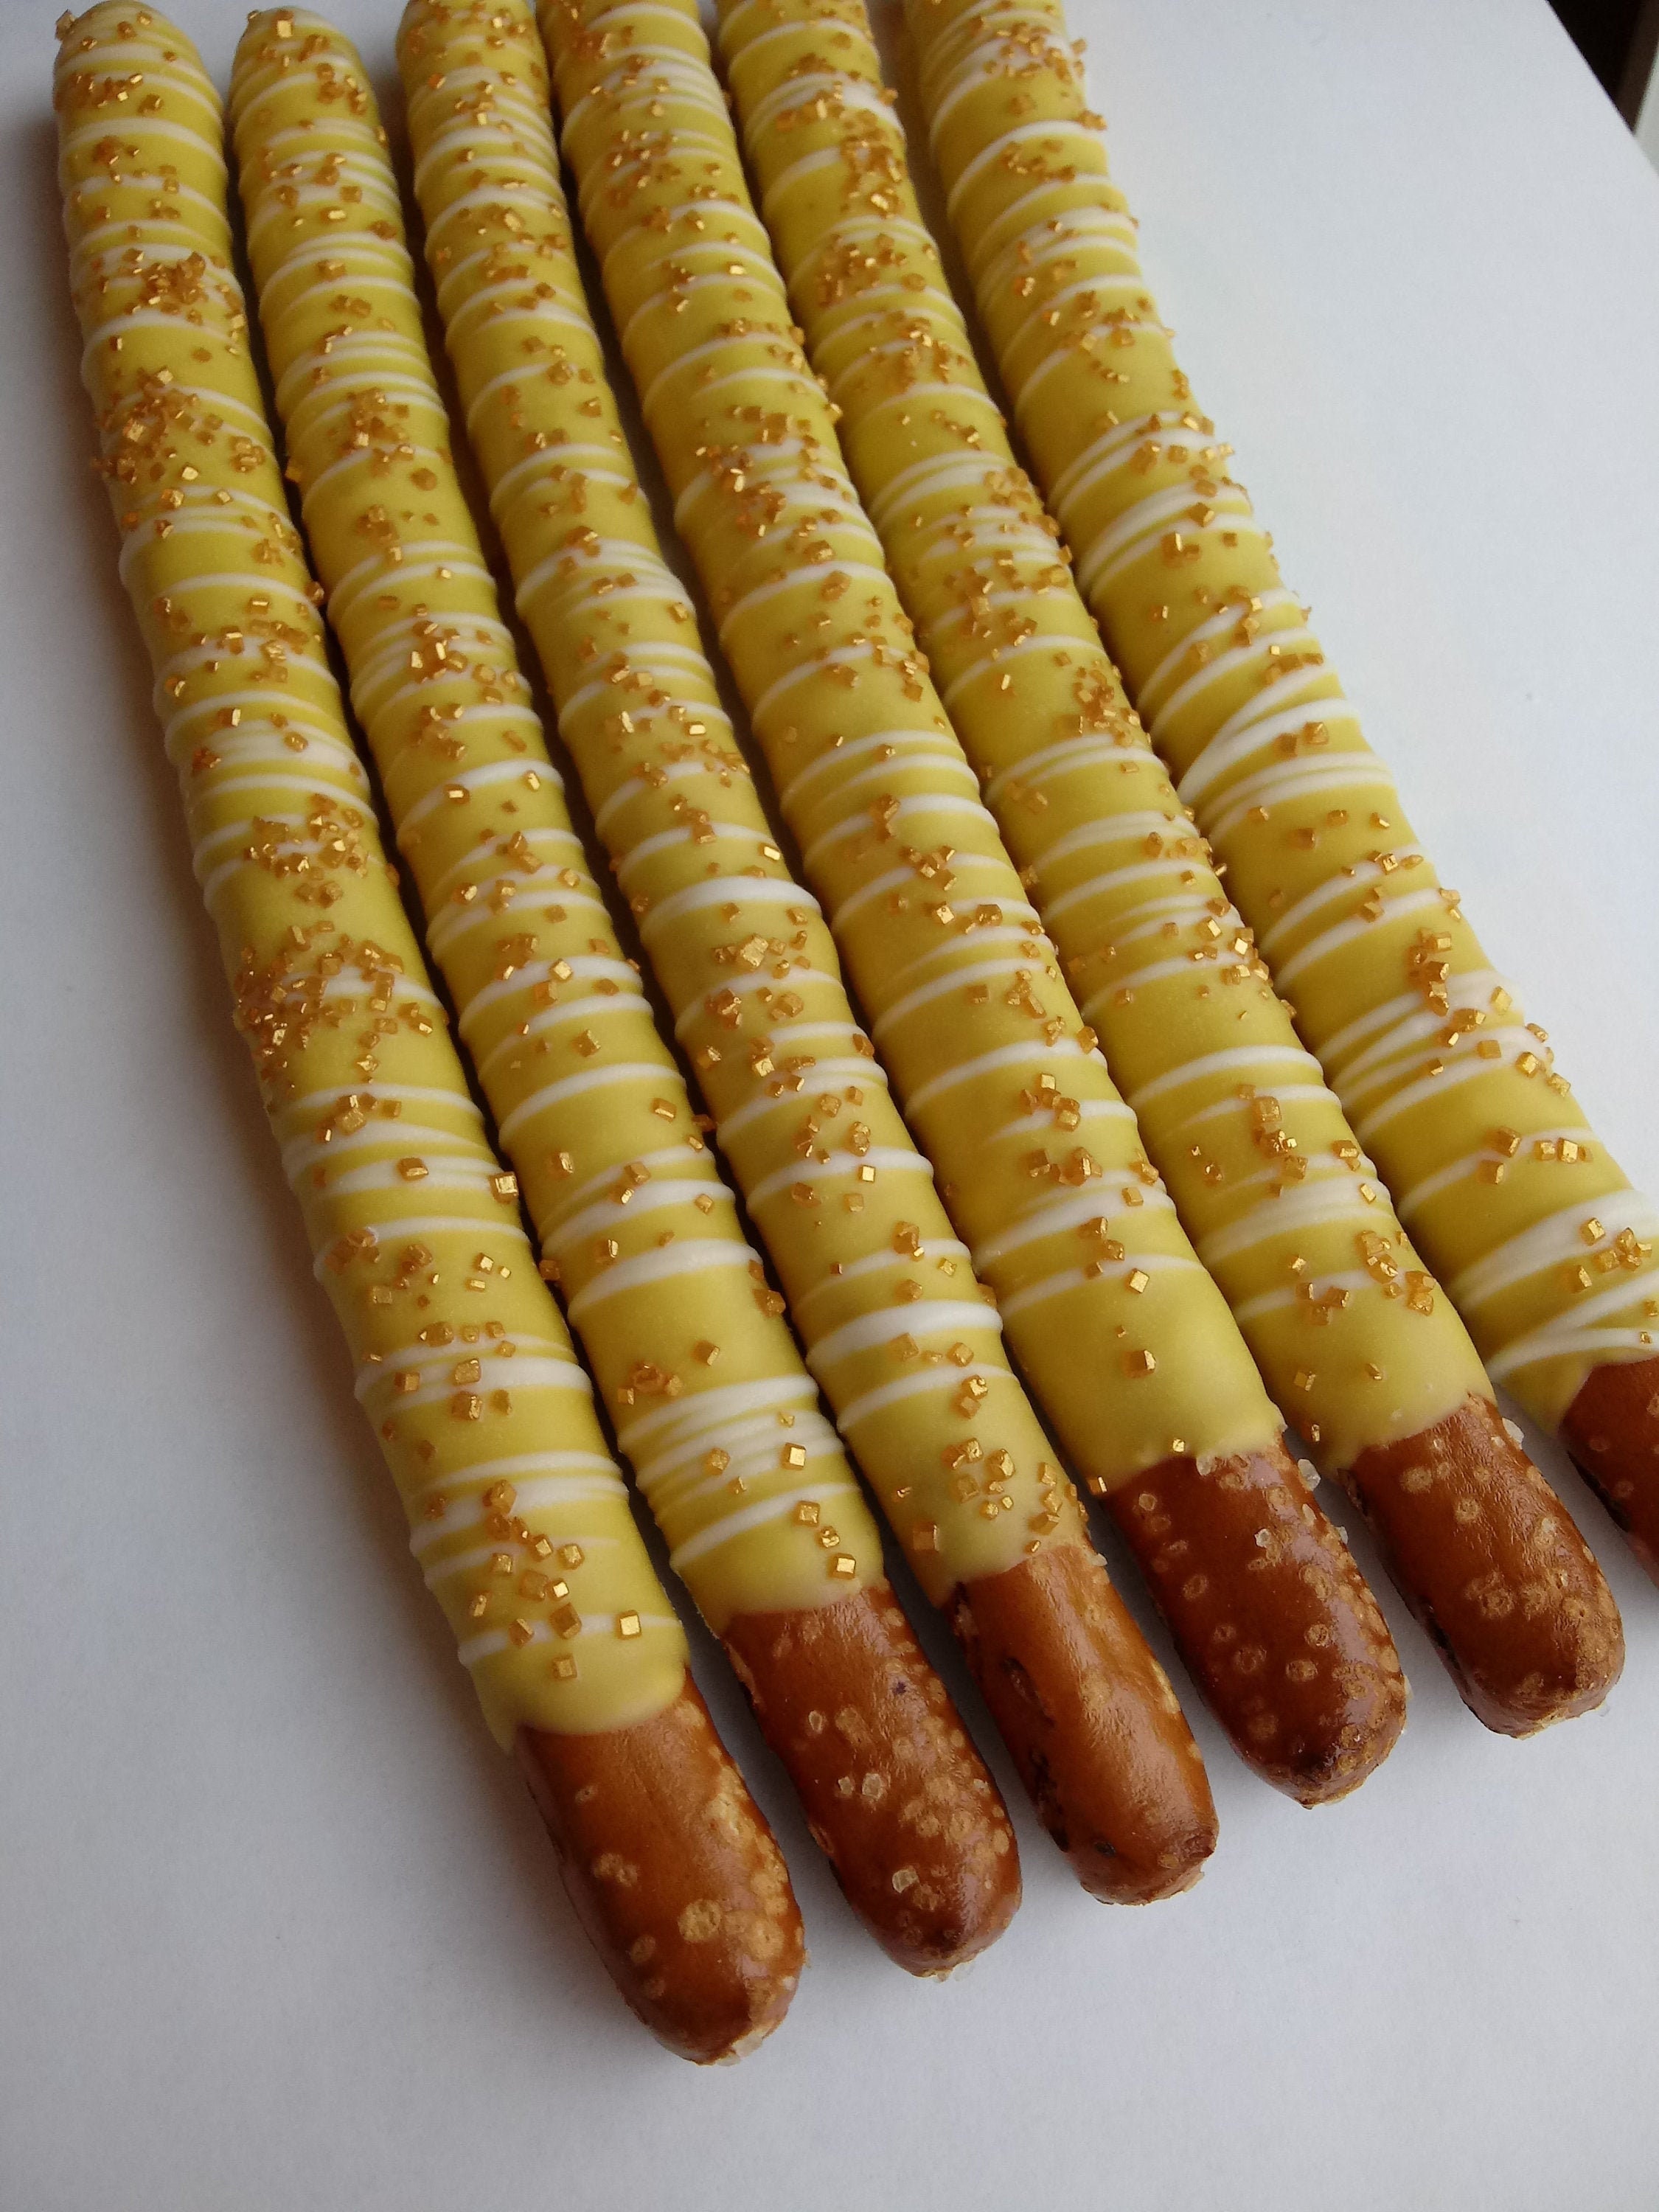 12 Yellow Chocolate Covered Pretzels With White Chocolate